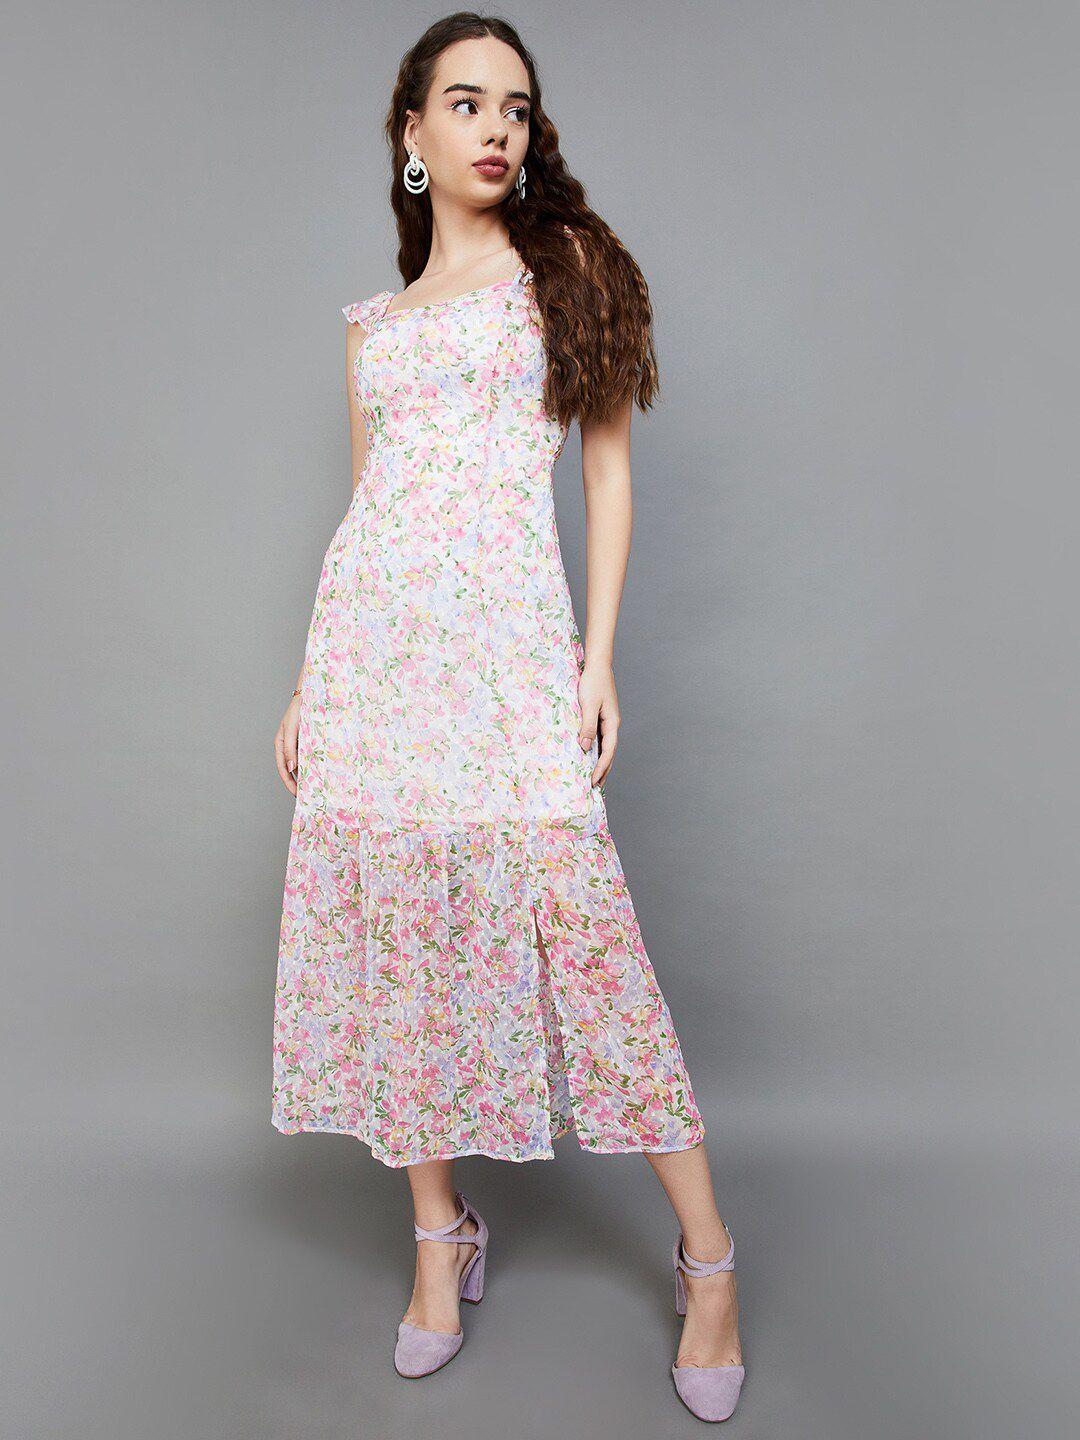 ginger-by-lifestyle-floral-printed-round-neck-sleeveless-maxi-dress